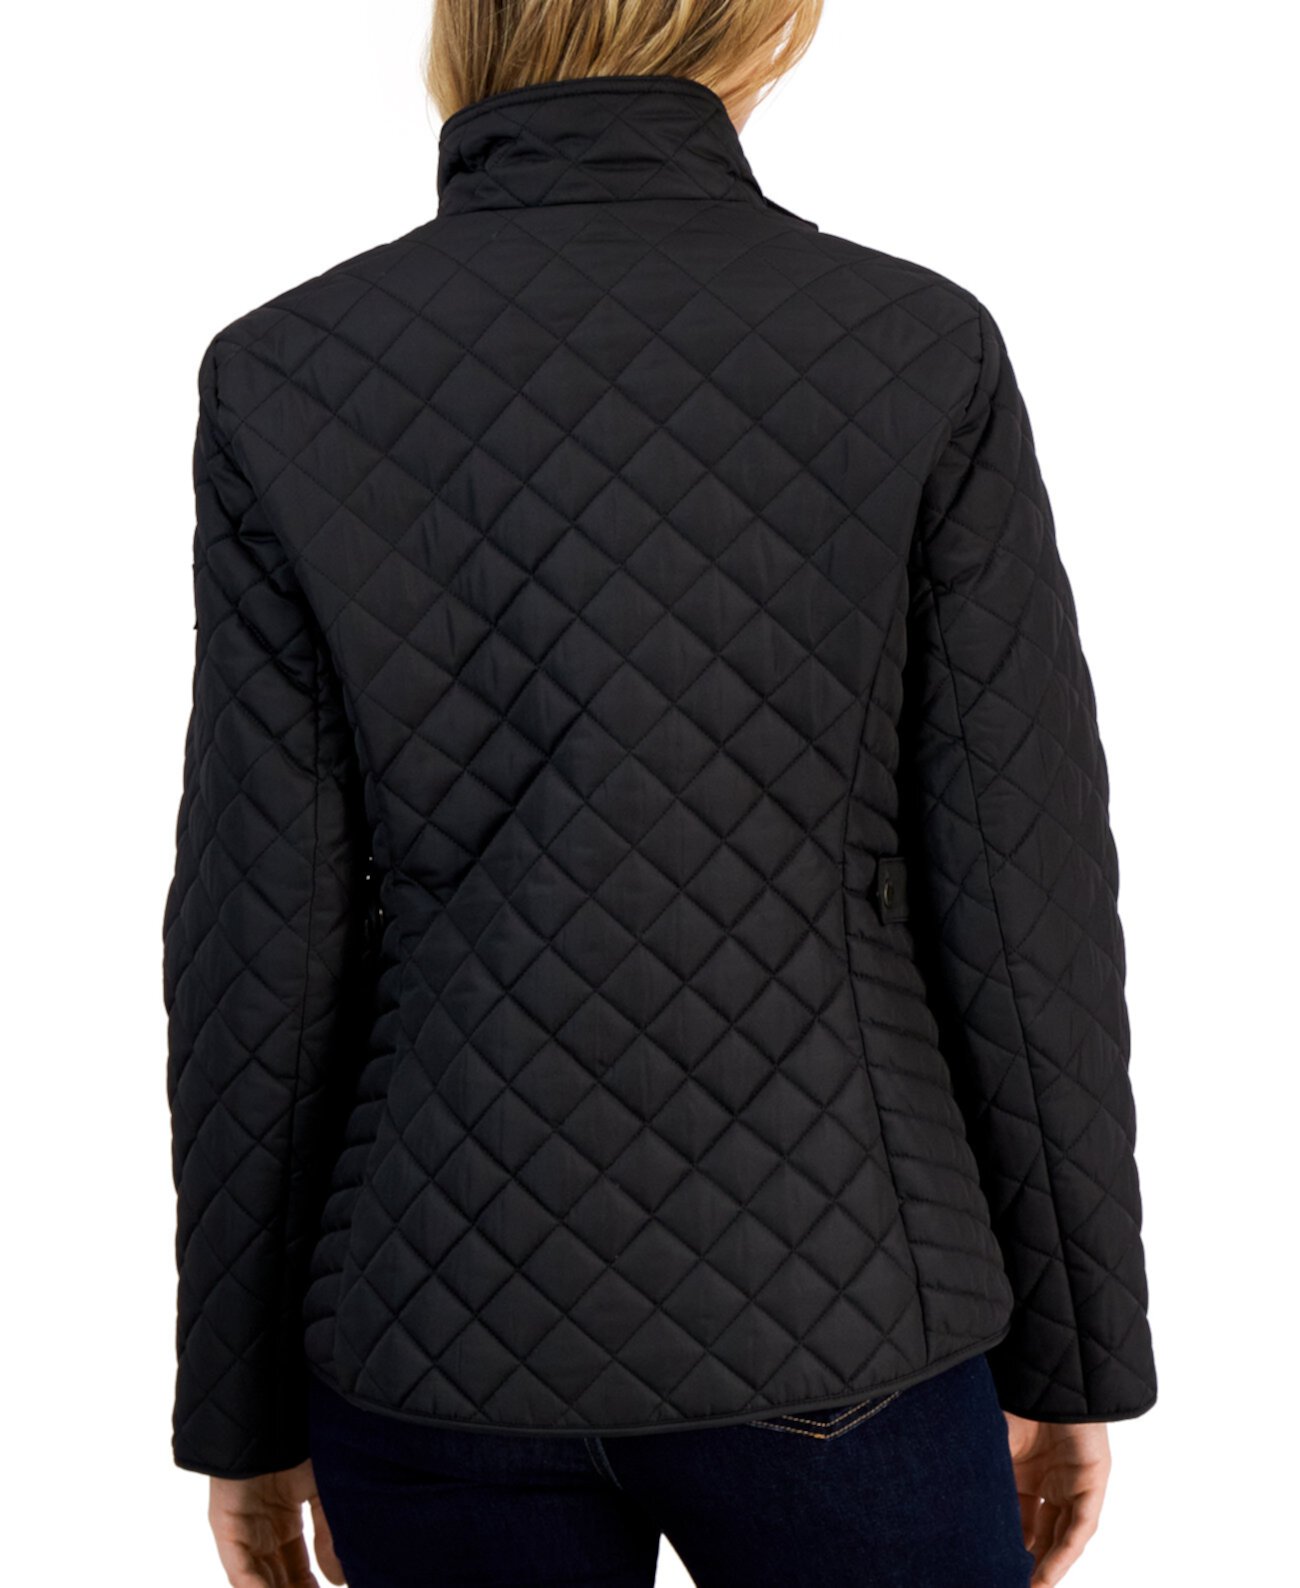 Women's Quilted Zip-Up Jacket Tommy Hilfiger